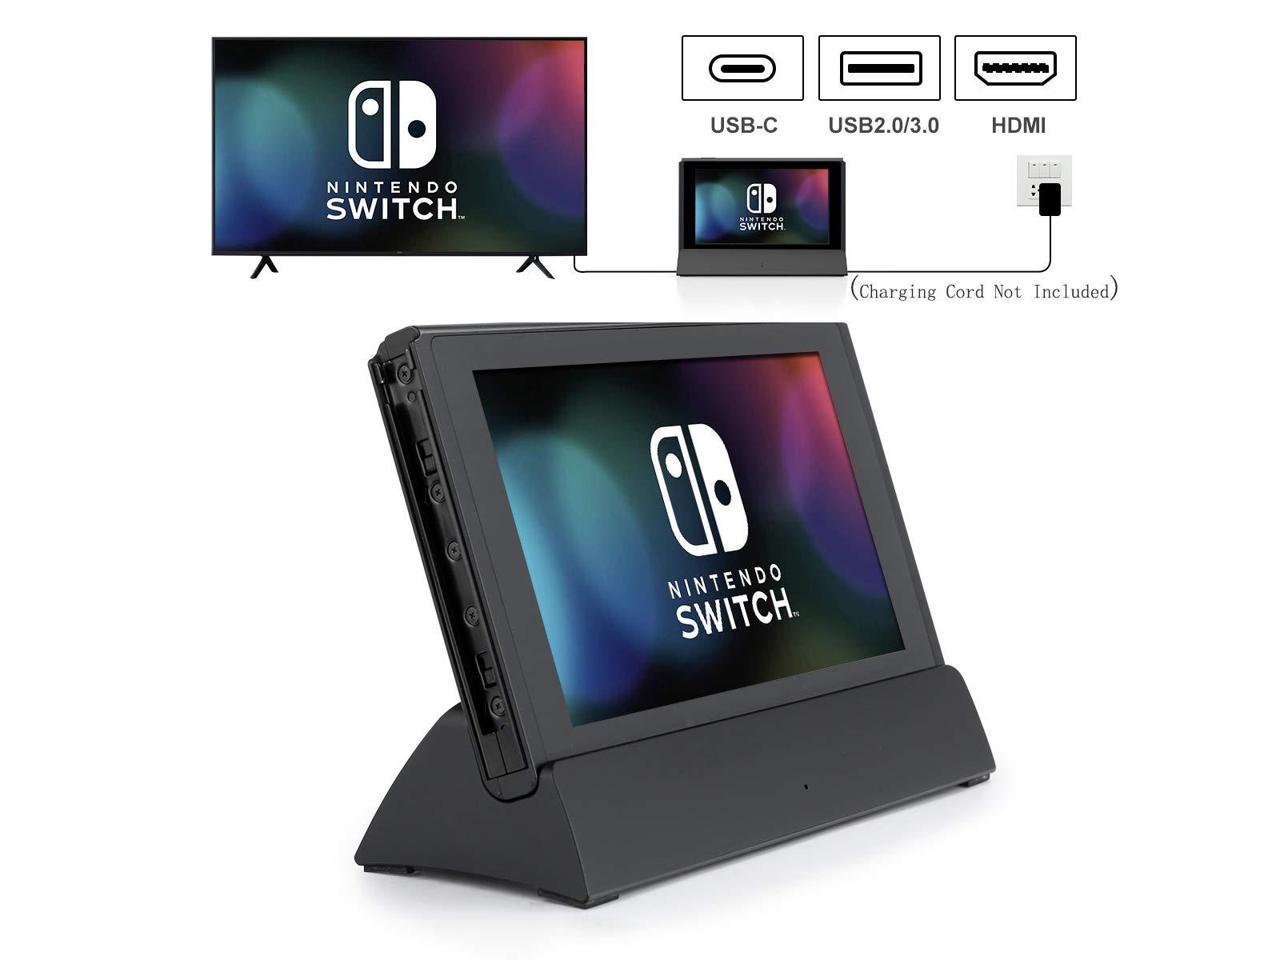 Replacement For Nintendo Switch Dock Vogek Tv Dock Station Portable Charging Docking Playstand For Nintendo Switch Charge And Play With Type C To Hdmi Tv Adapter Usb 3 0 2 0 Newegg Com